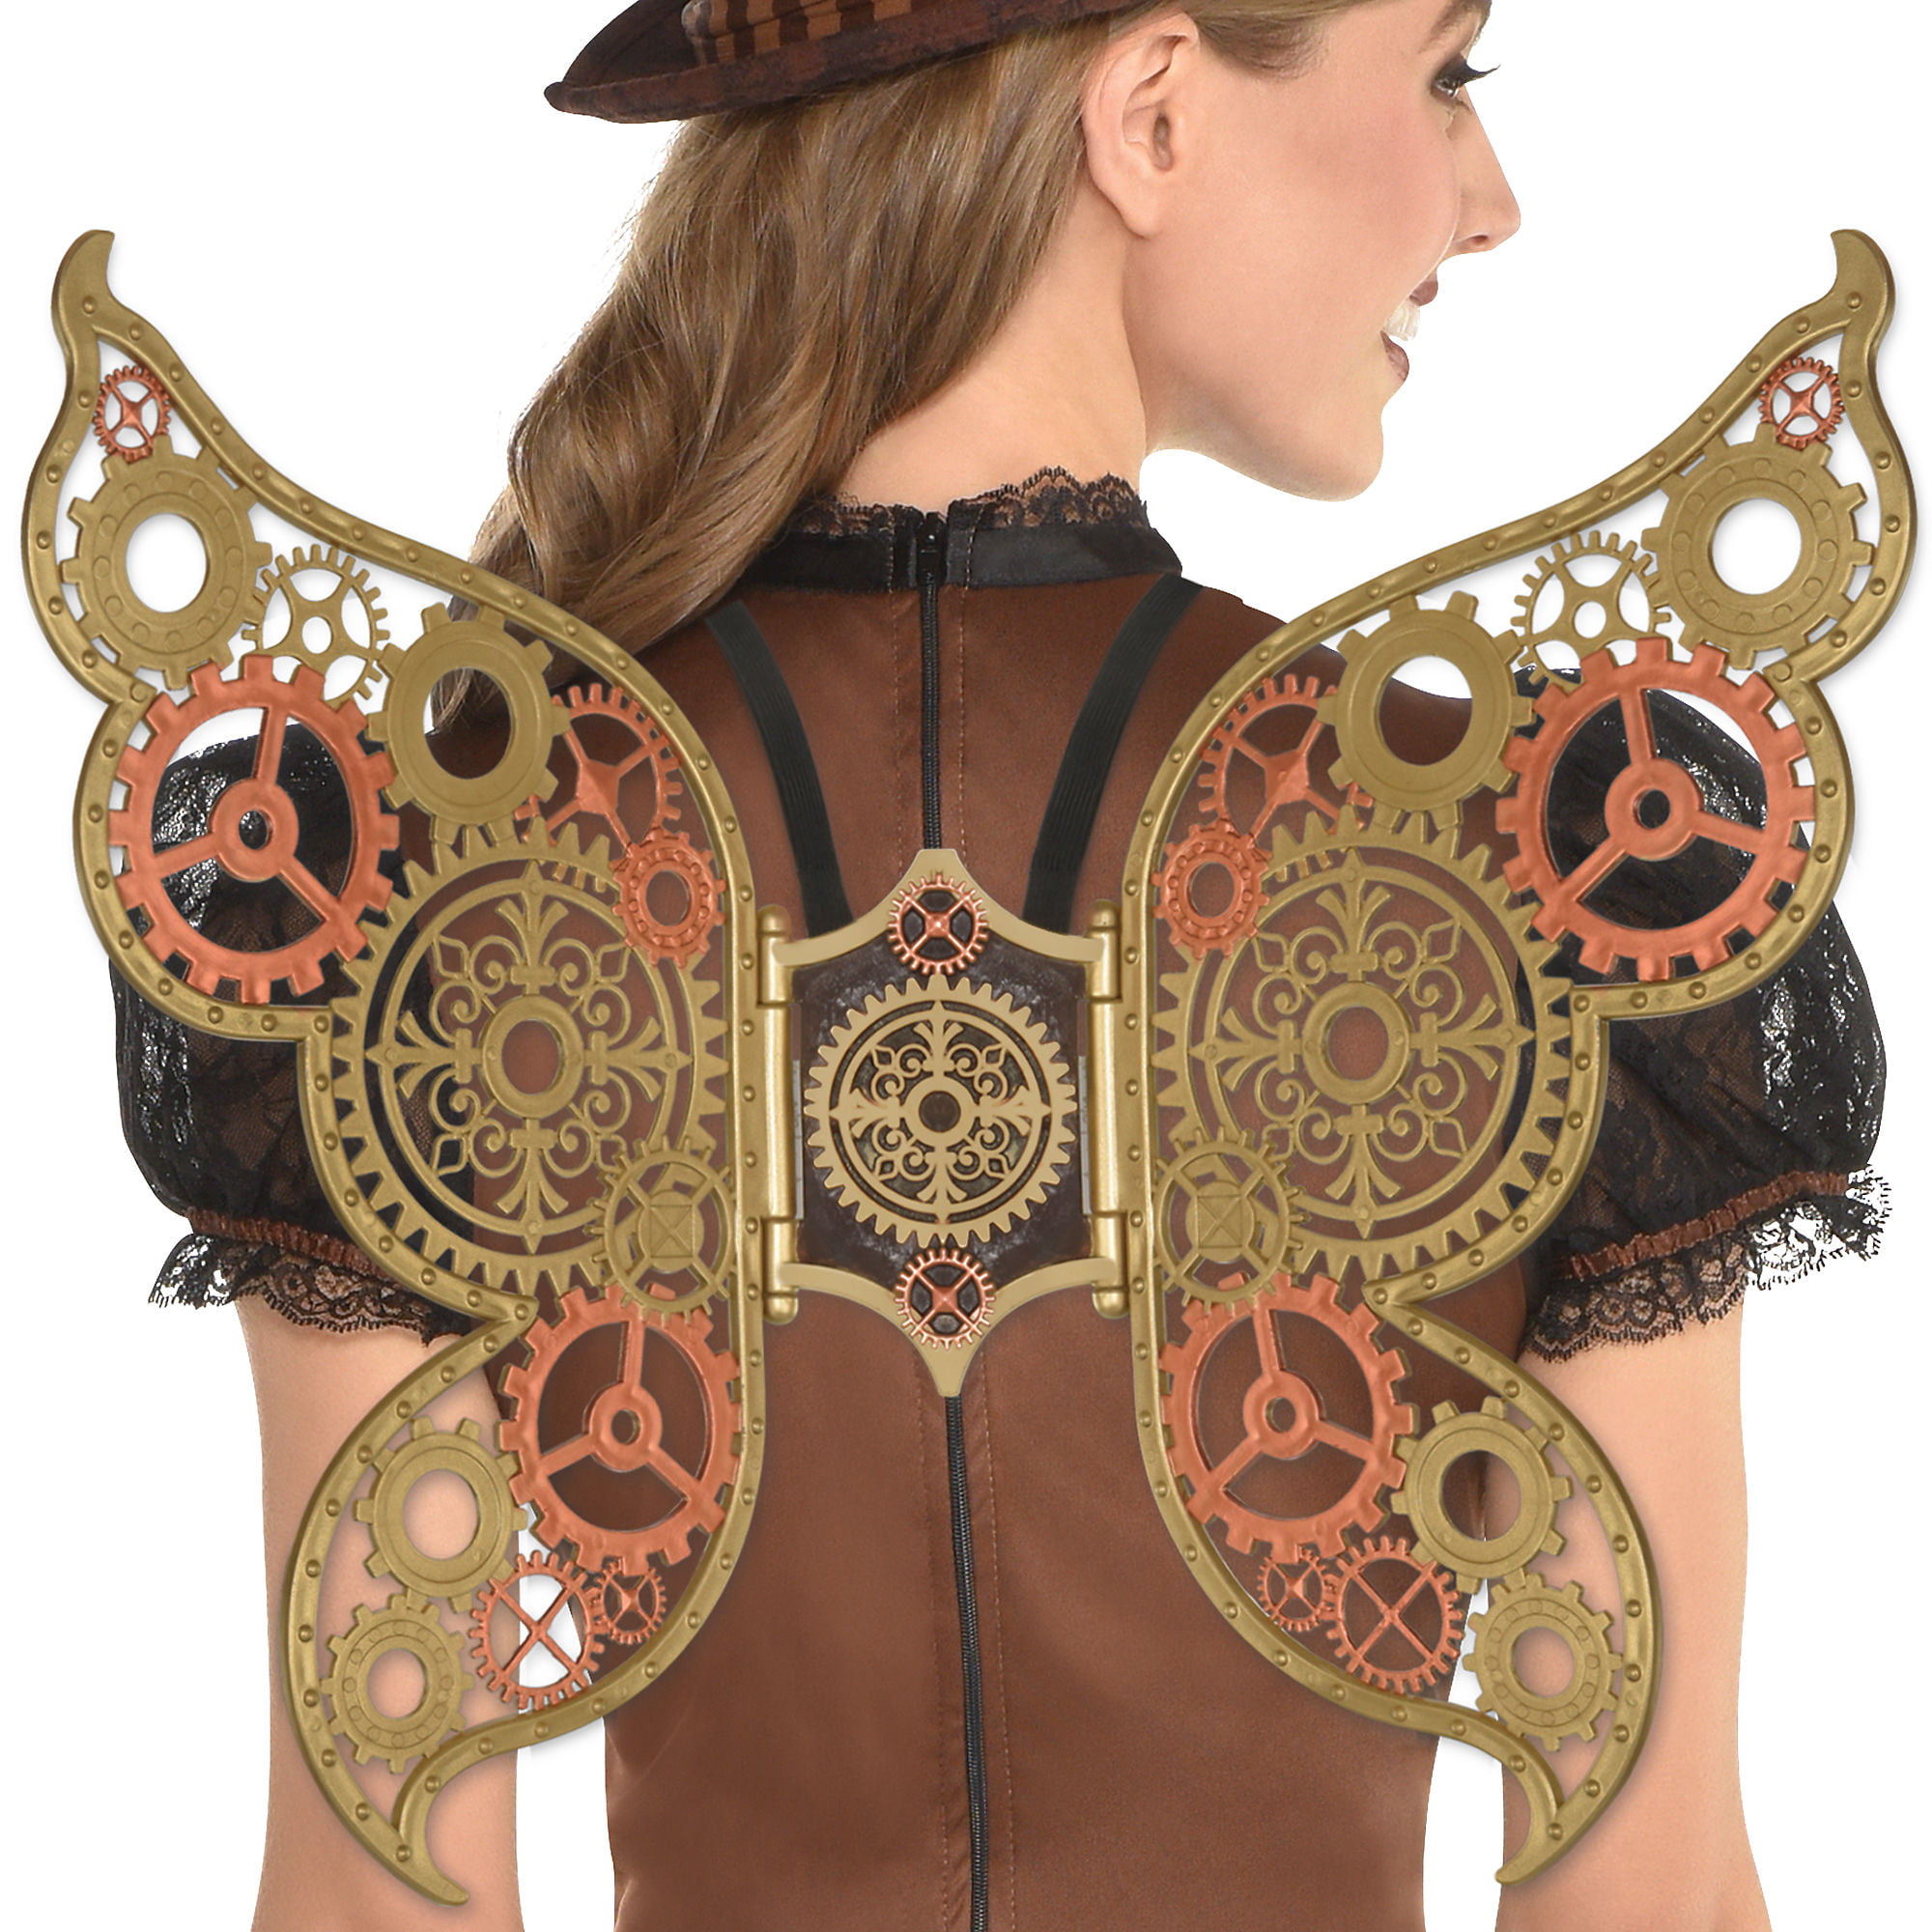 Steampunk Collar w/ Gears and Chains Industrial Victorian Costume Accessory 